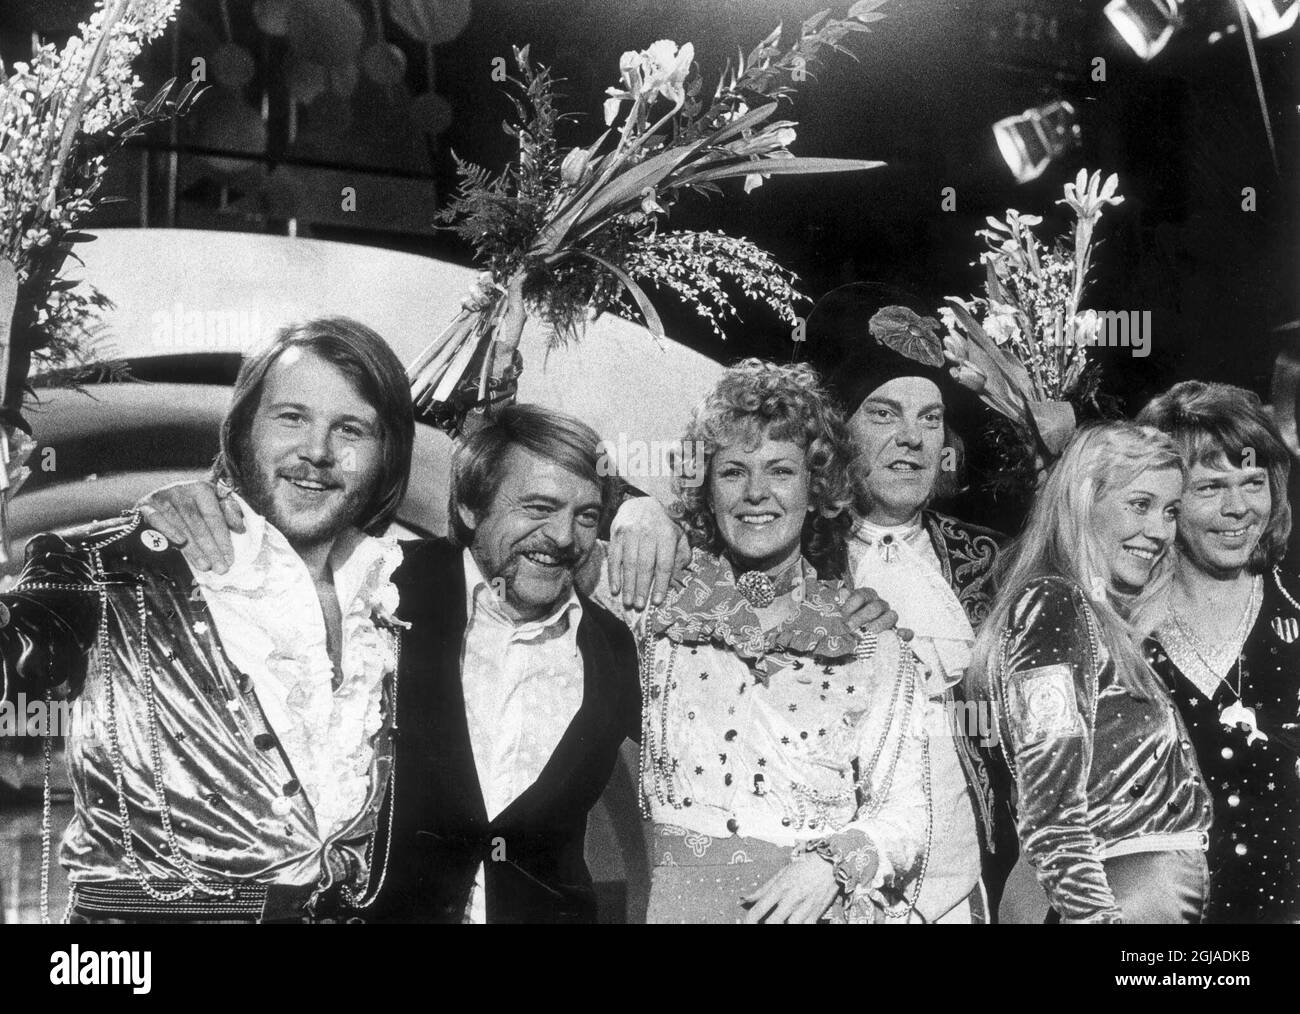 (FILES) A 1974 file photo showing Stig "Stikkan" Andersson (2-L) with Swedish pop group "ABBA", Benny Andersson (L), Annifrid Lyngstad (C-L), conductor Sven-Olof Walldoff (C-R), Agnetha Faltskog (2-R) and Bjorn Ulvaeus after winning the Eurovision Song Contest in Brighton, England. Andersson, who produced the records Swedish pop group ABBA that topped the charts around the globe during the 1970's and 1980's, died of a heart attack 12 September, aged 66. Scanpix Code 20360 Stock Photo